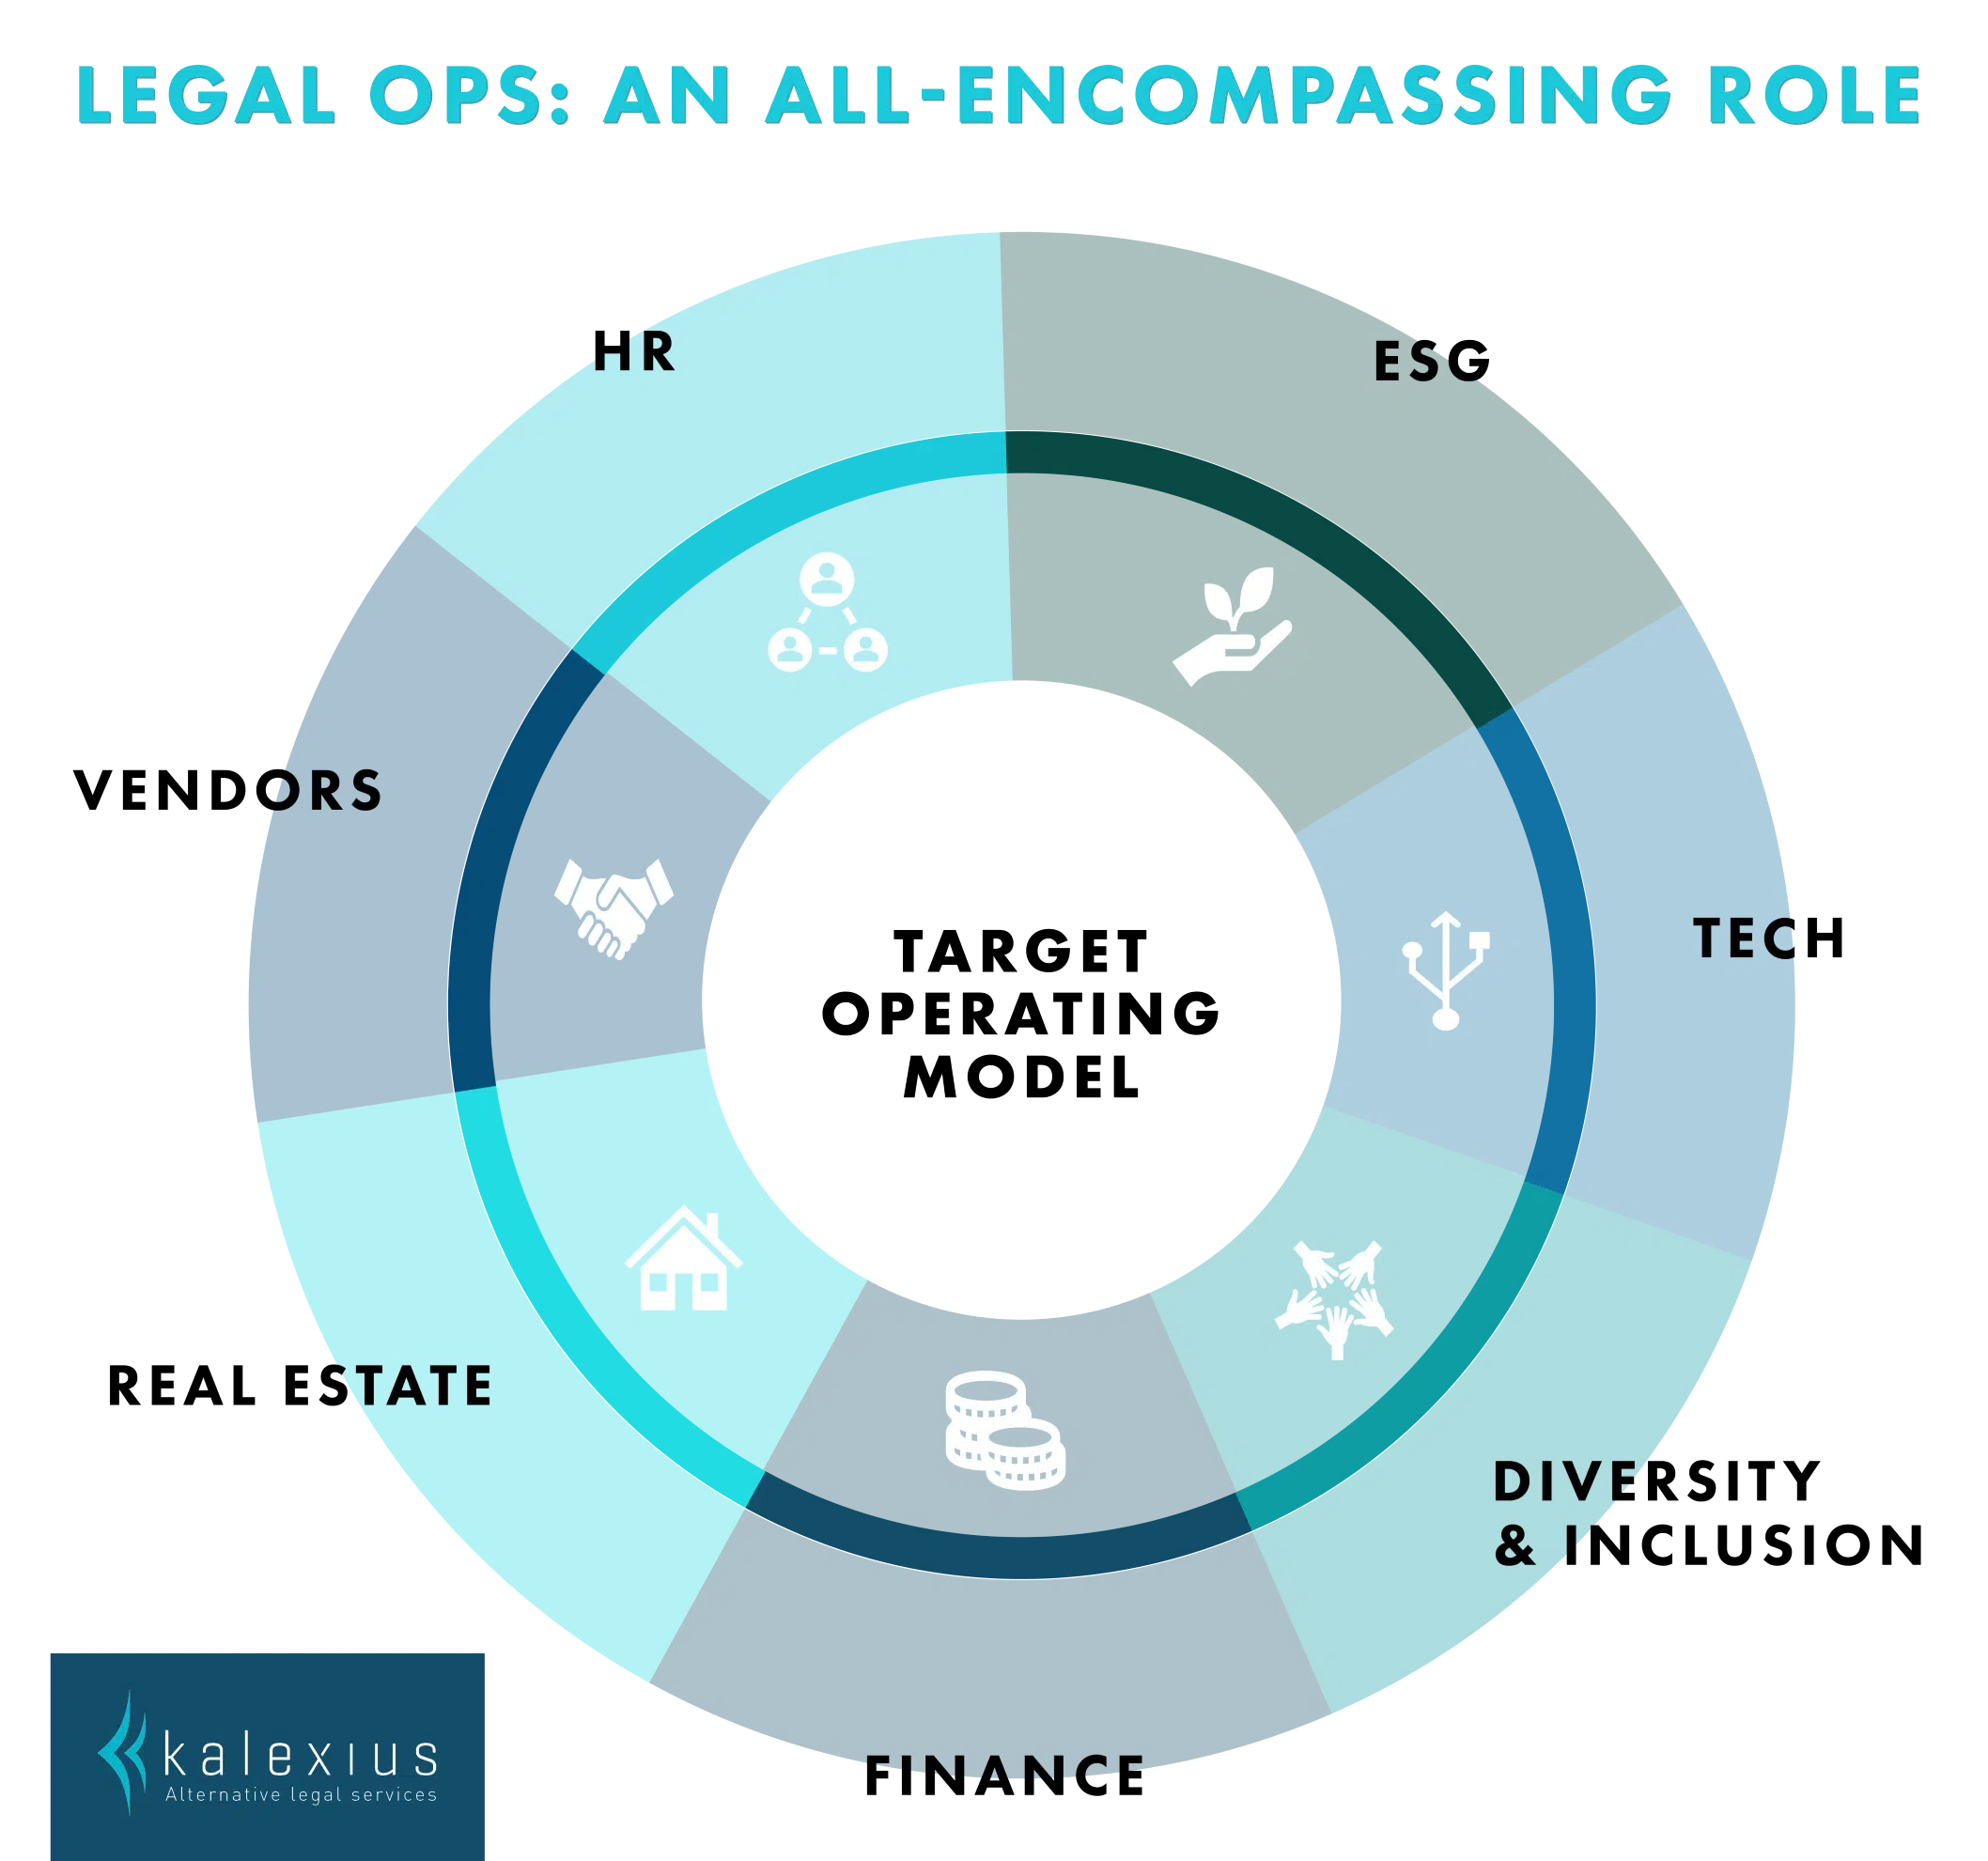 What Does In-House Legal Operations Encompass?